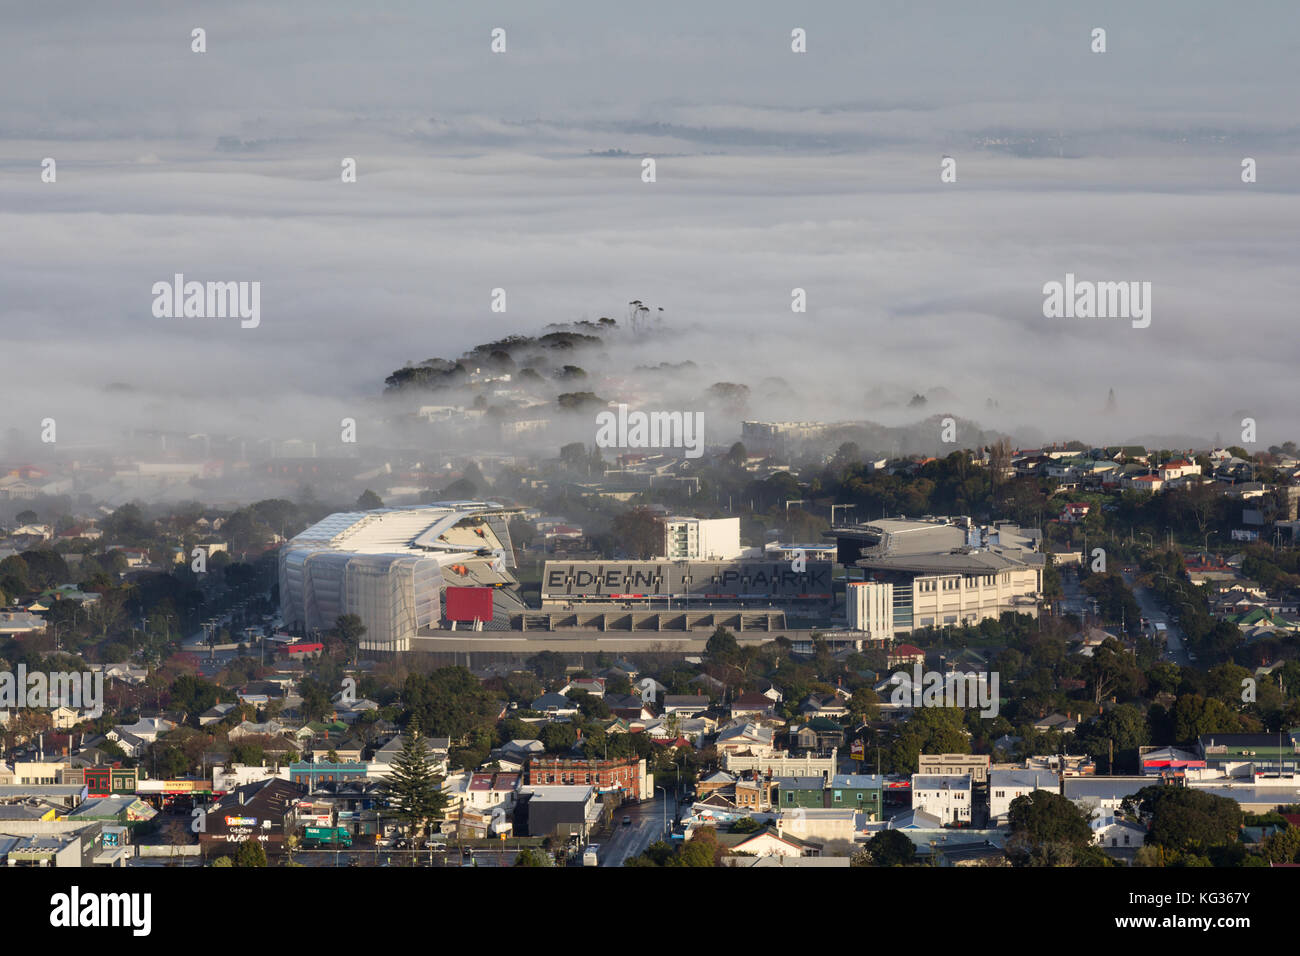 Eden Park as seen from Mount Albert on a foggy morning, Auckland, New Zealand Stock Photo